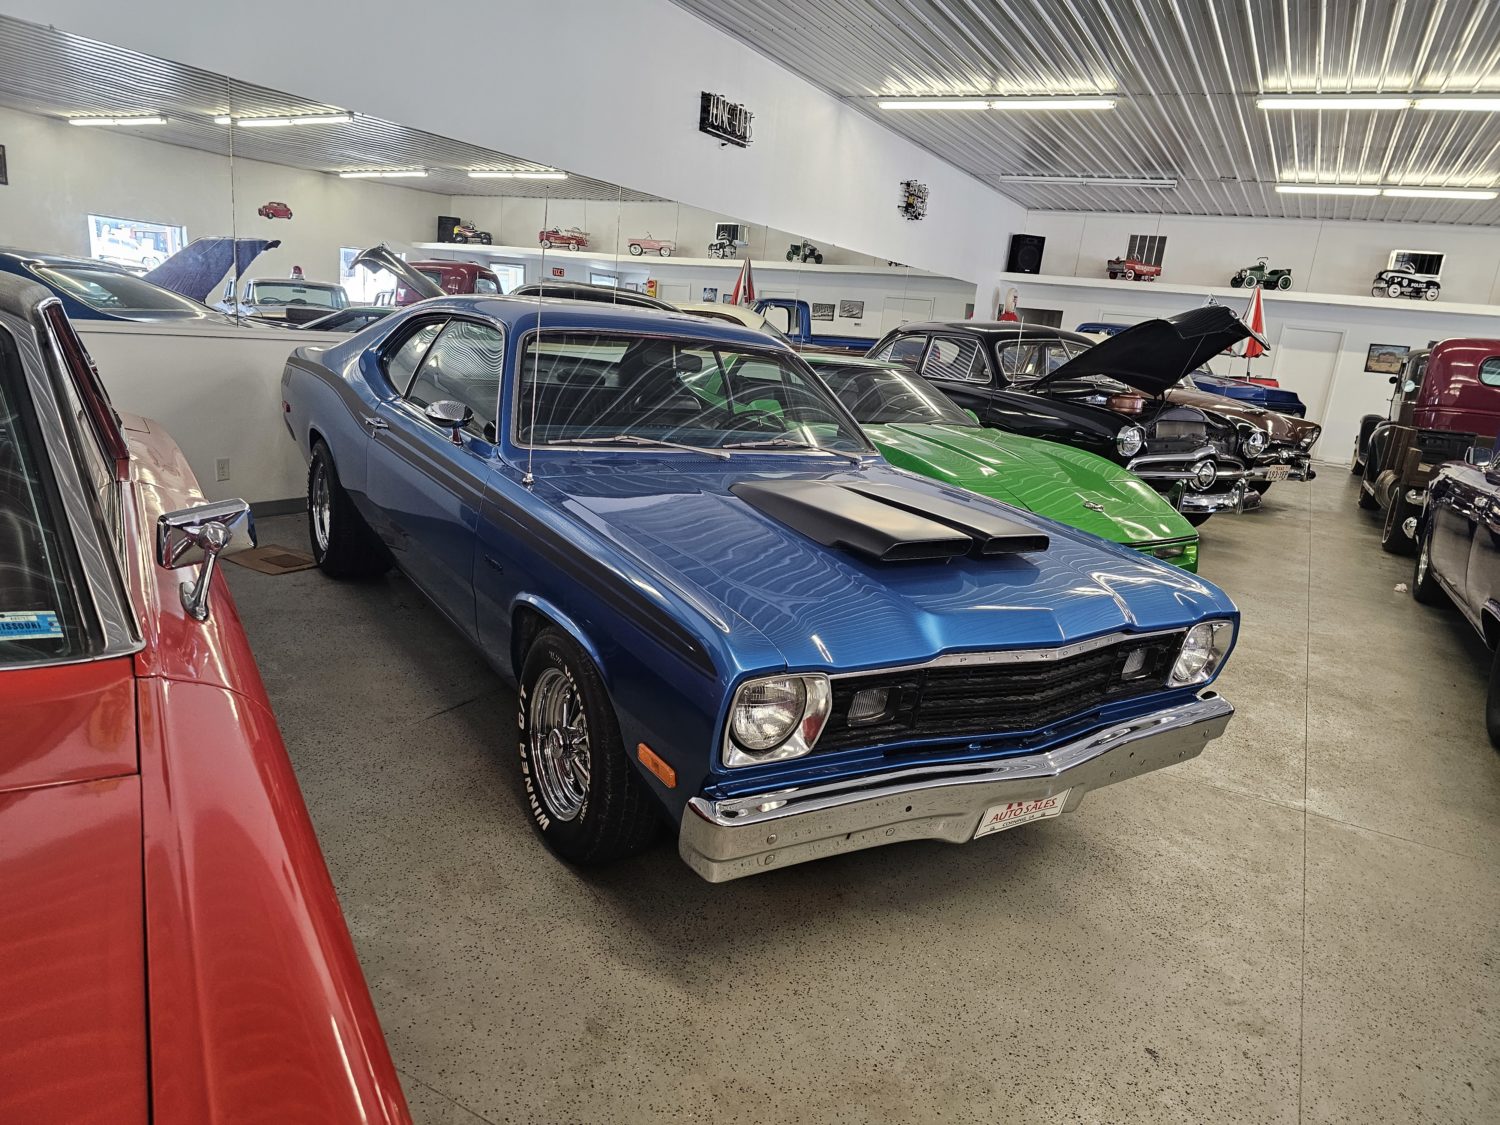 Approx. 100 American Classics Cars At Auction! The Sorensen Collection-LIVE ONSITE W/ONLINE BIDDING!  - image 6